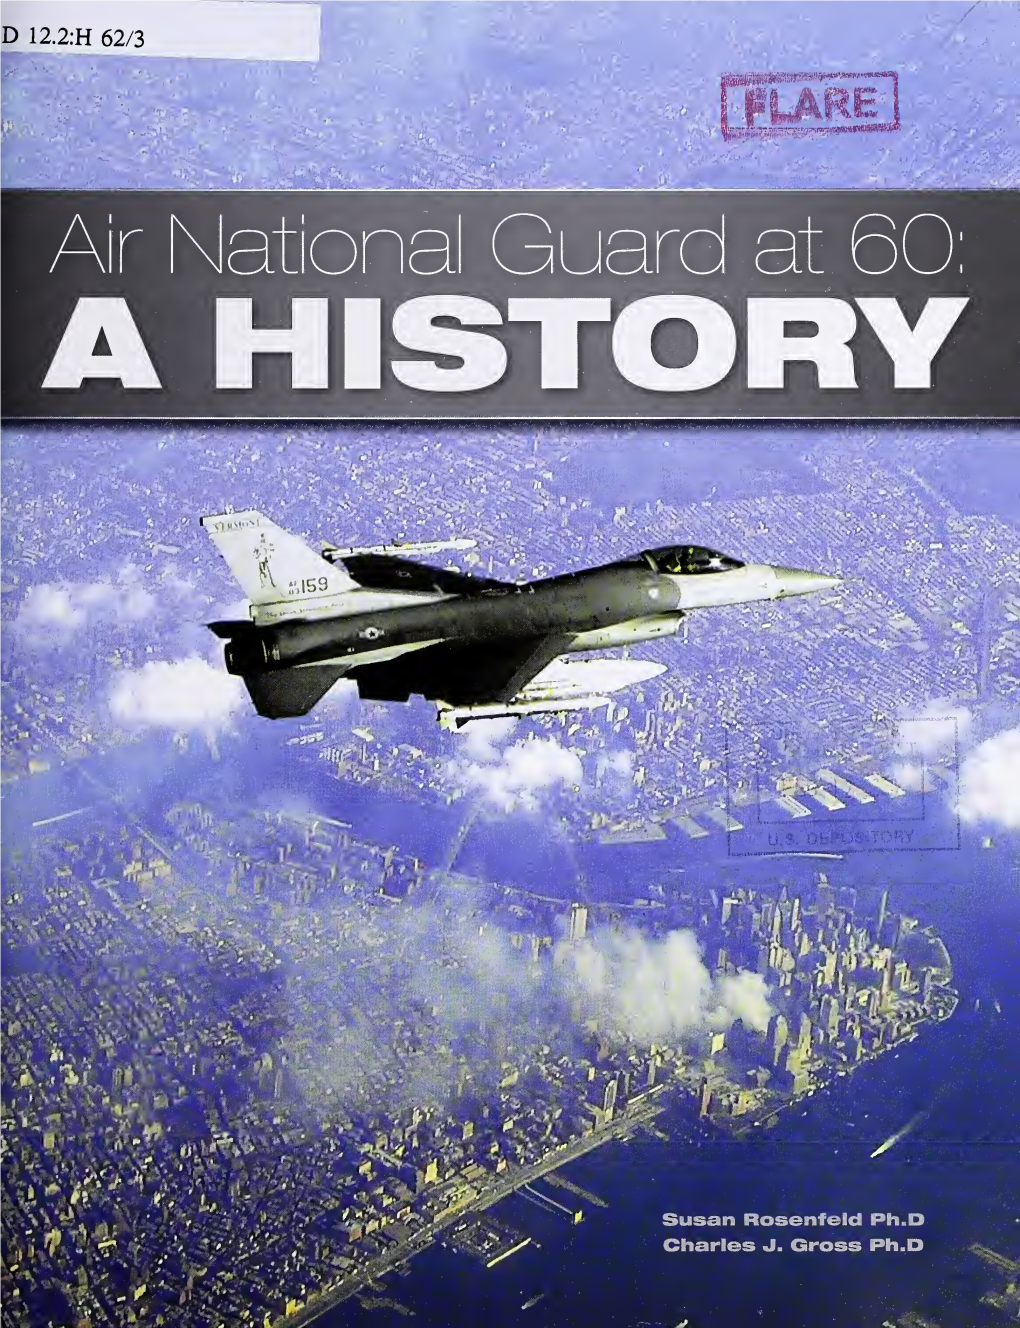 AIR NATIONAL GUARD at 60: a HISTORY Possible War with the Soviet Union